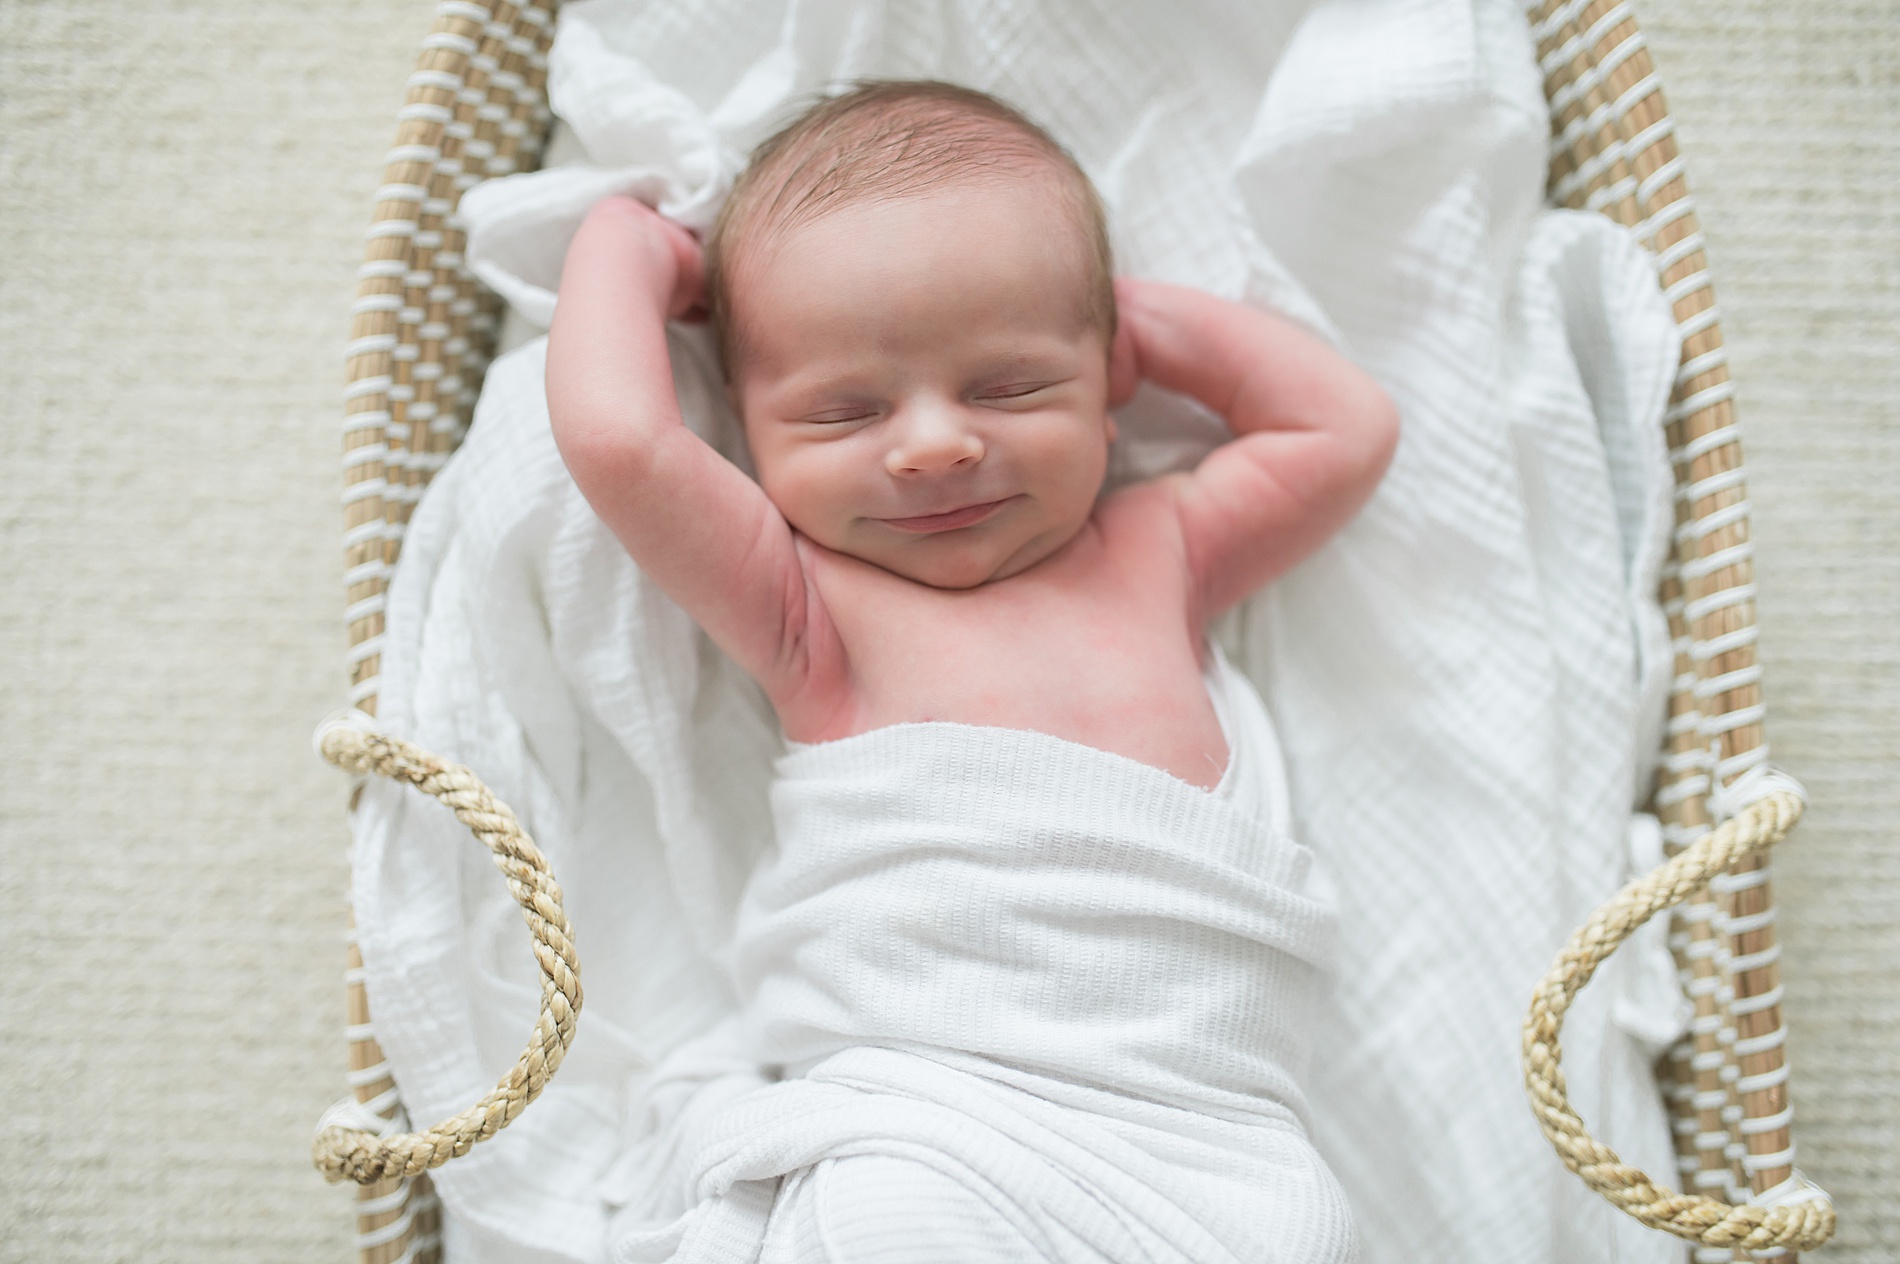 newborn smiles in his sleep | Preparing for a Newborn Session by Lindsey Dutton Photography, Dallas Newborn photographer